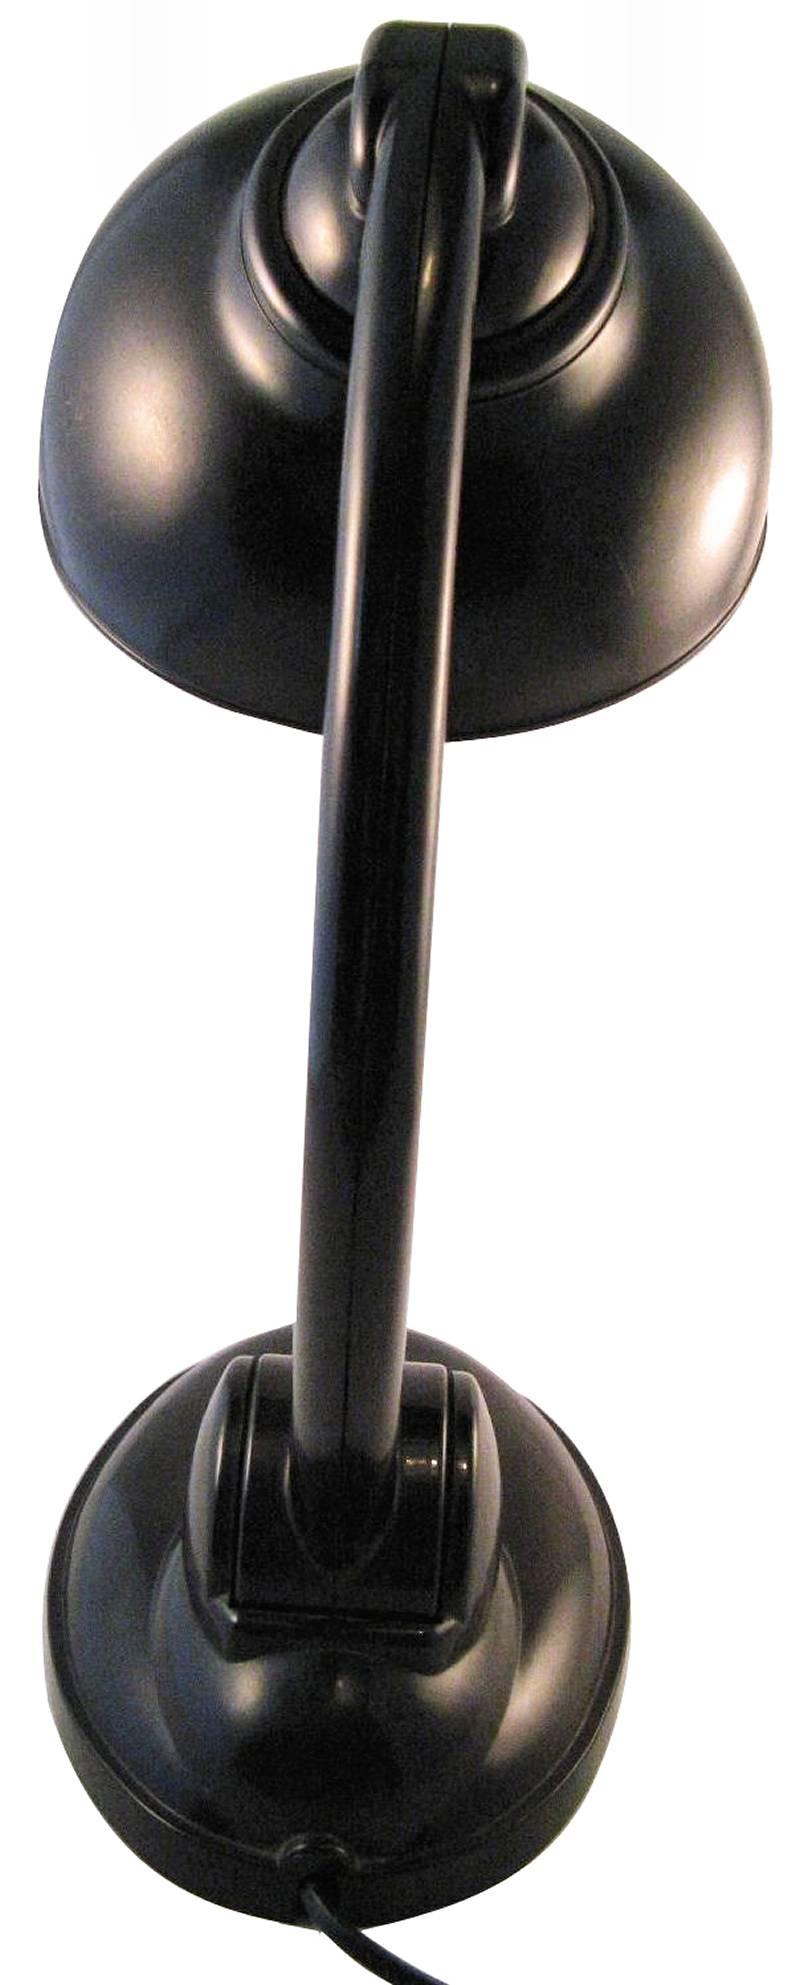 A stunning example of Eric Kirkman Cole's Art Deco stylish table lamp in superb brown bakelite. A model designed in the 1930s and produced in European countries under License. The shade is mounted to a shoulder joint and can be adjusted in all